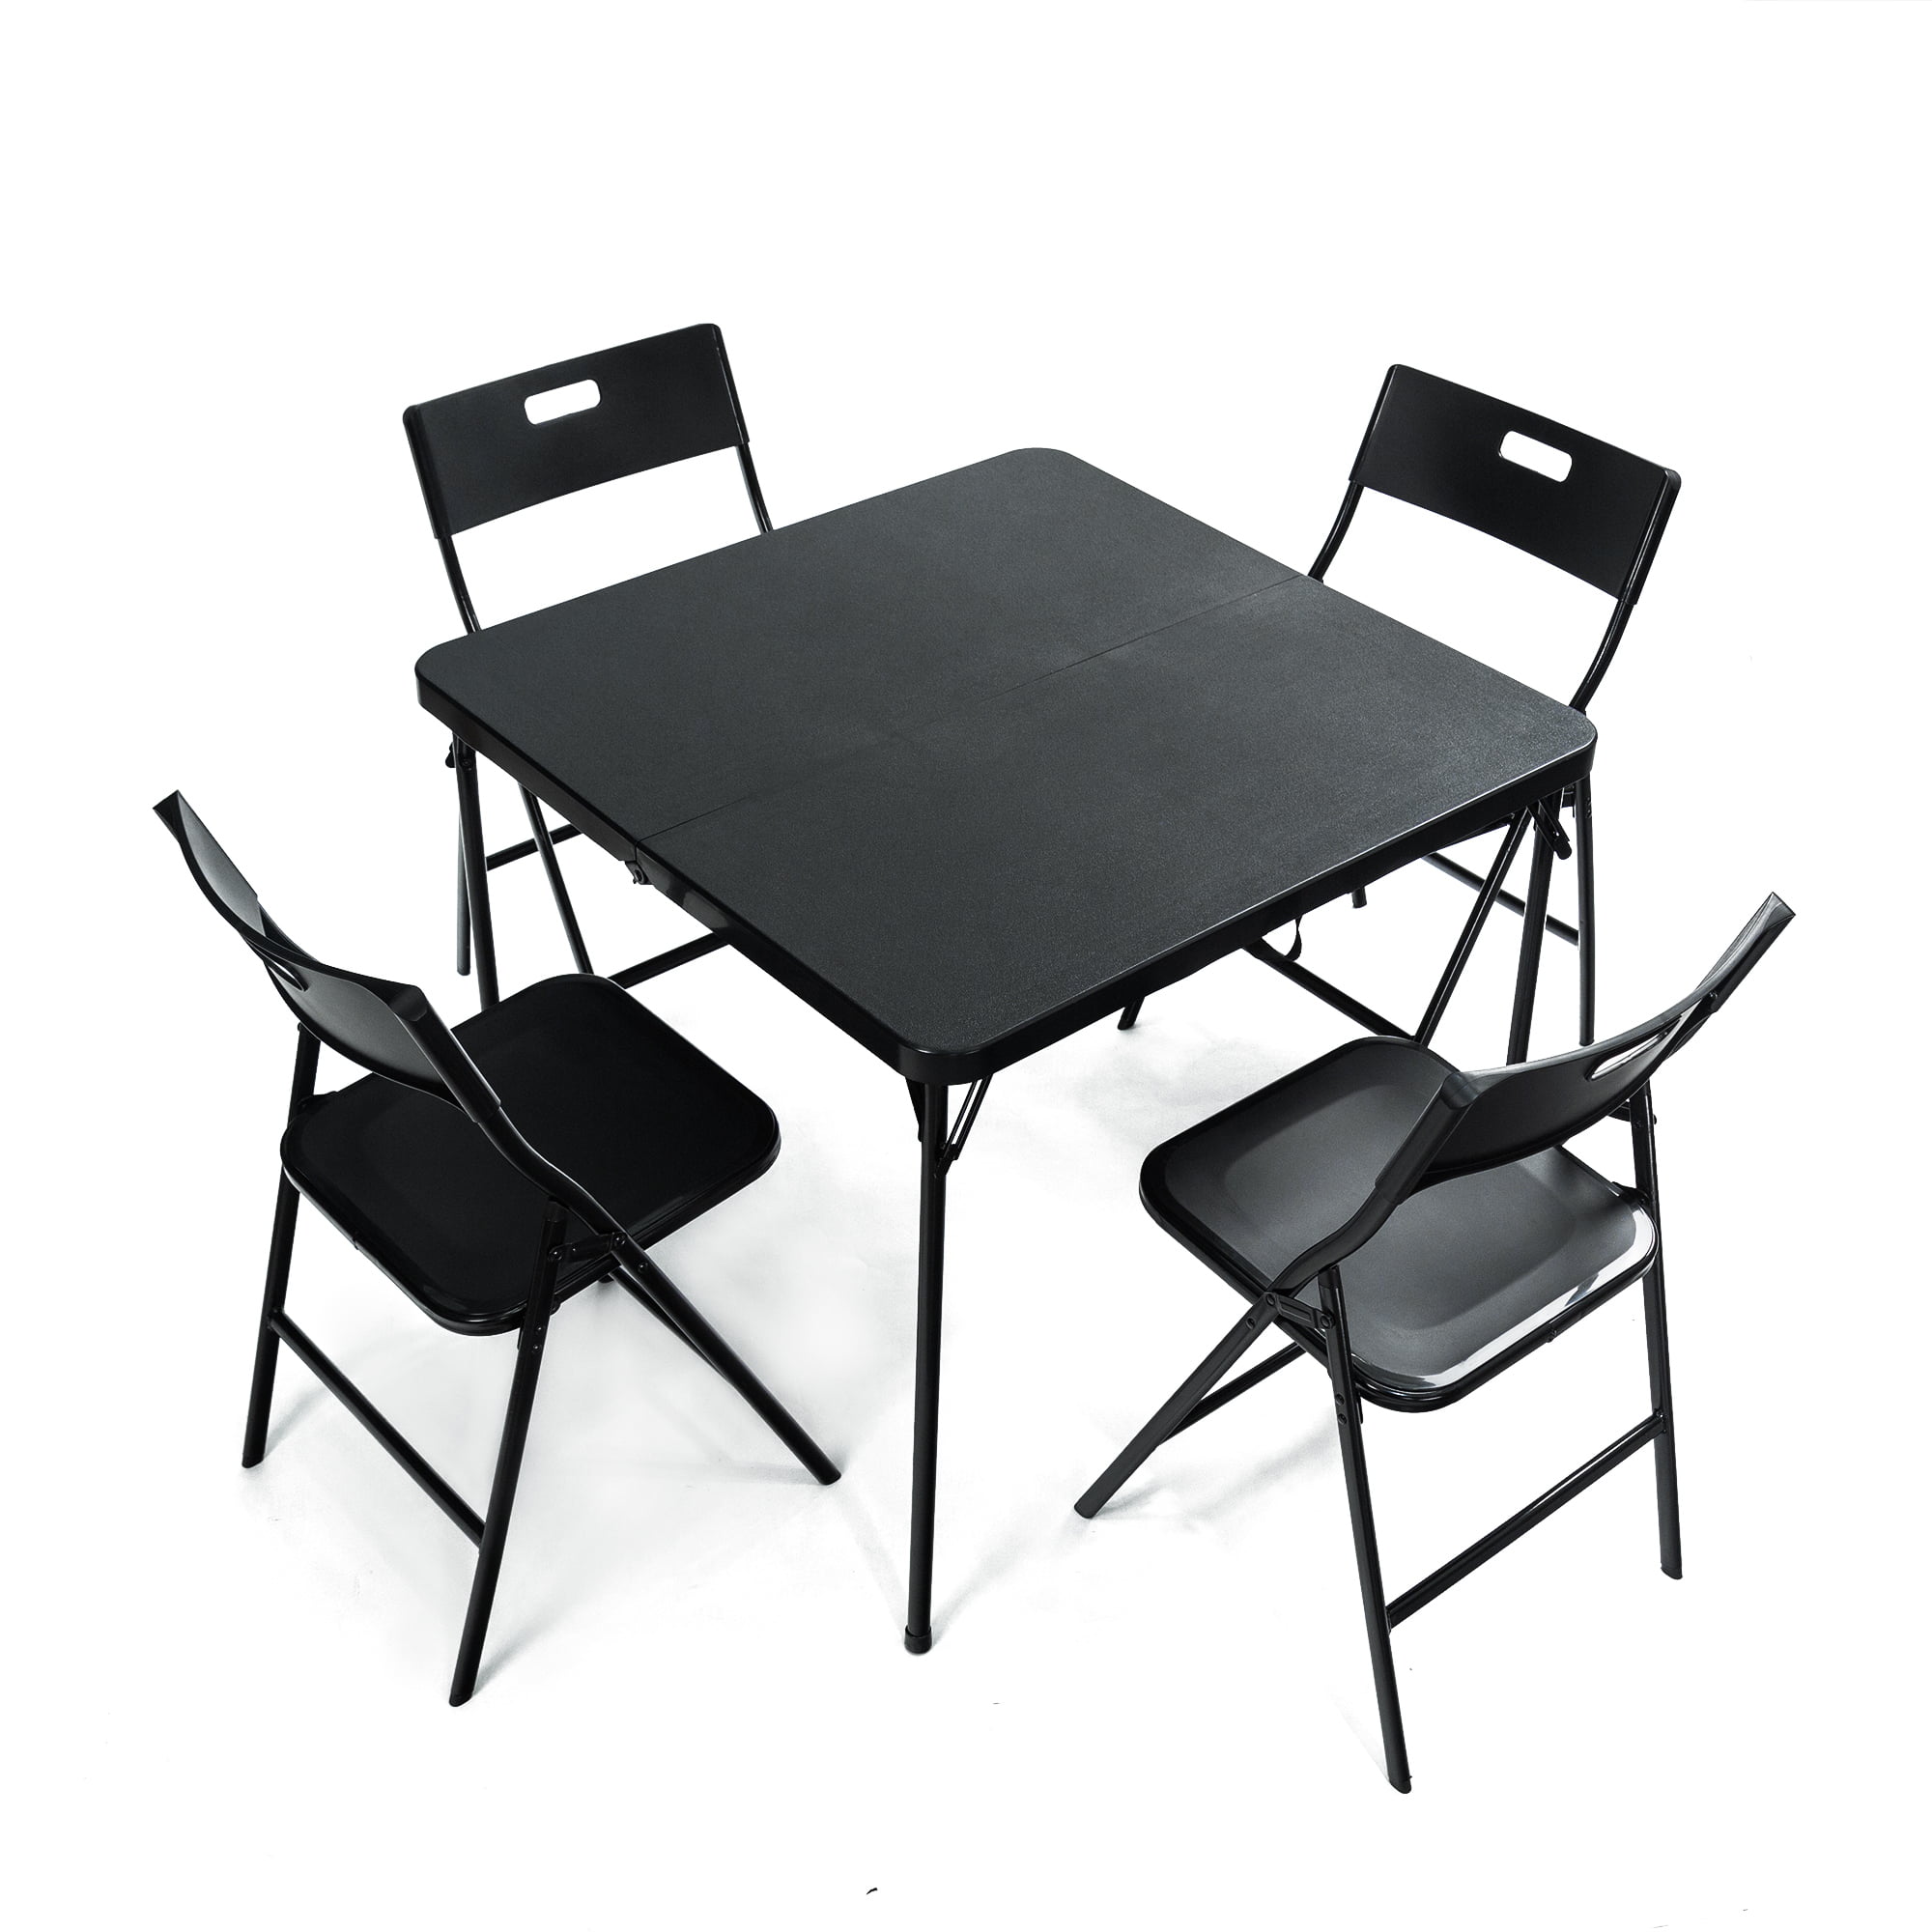 Details about   5 Piece Table and Four Chairs Set Resin Plastic Card Indoor/outdoor 